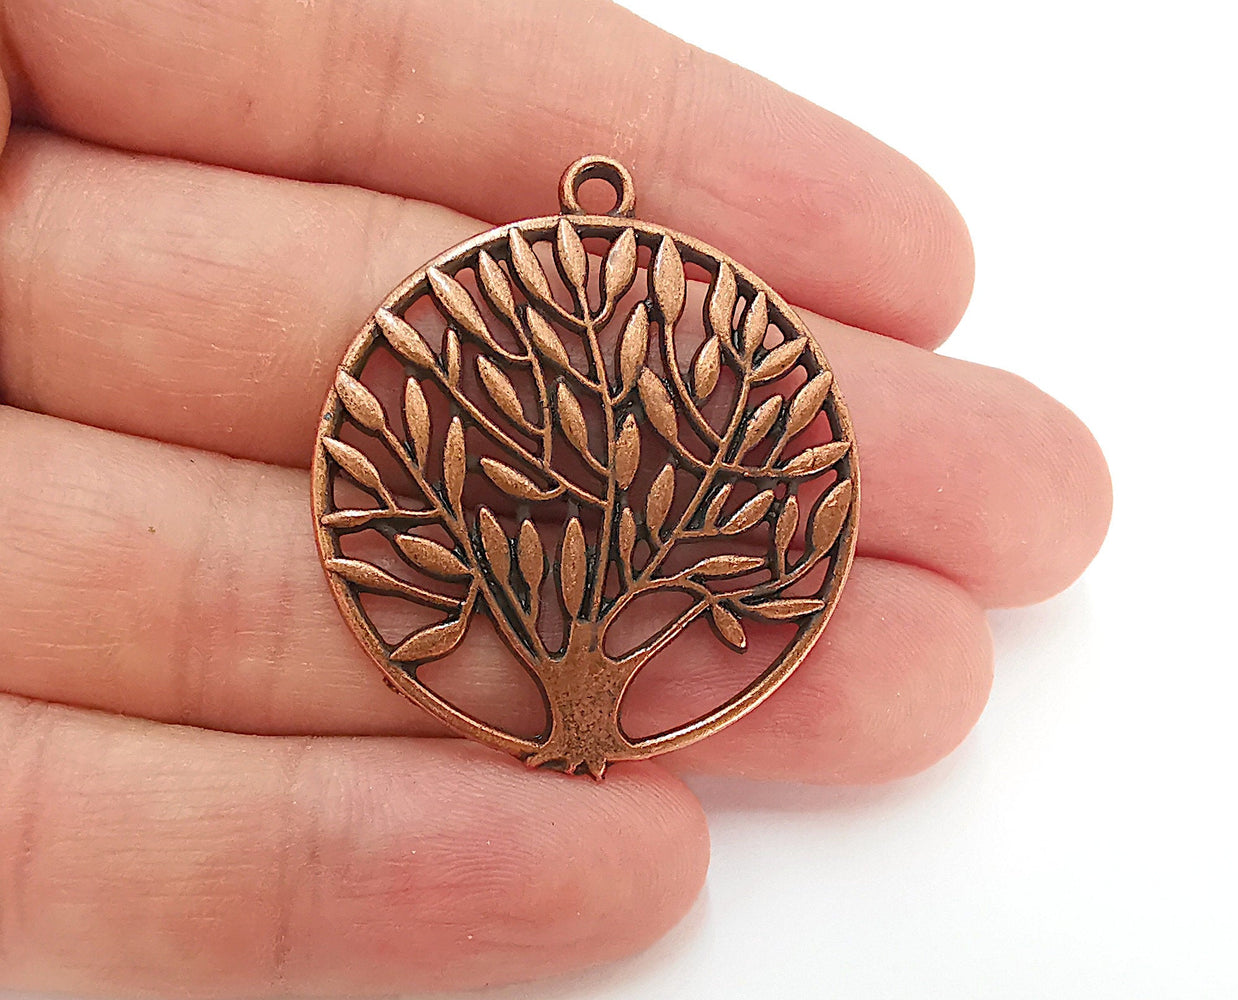 2 Tree Charm Antique Copper Charm Antique Copper Plated Charms (42x36mm) G21644